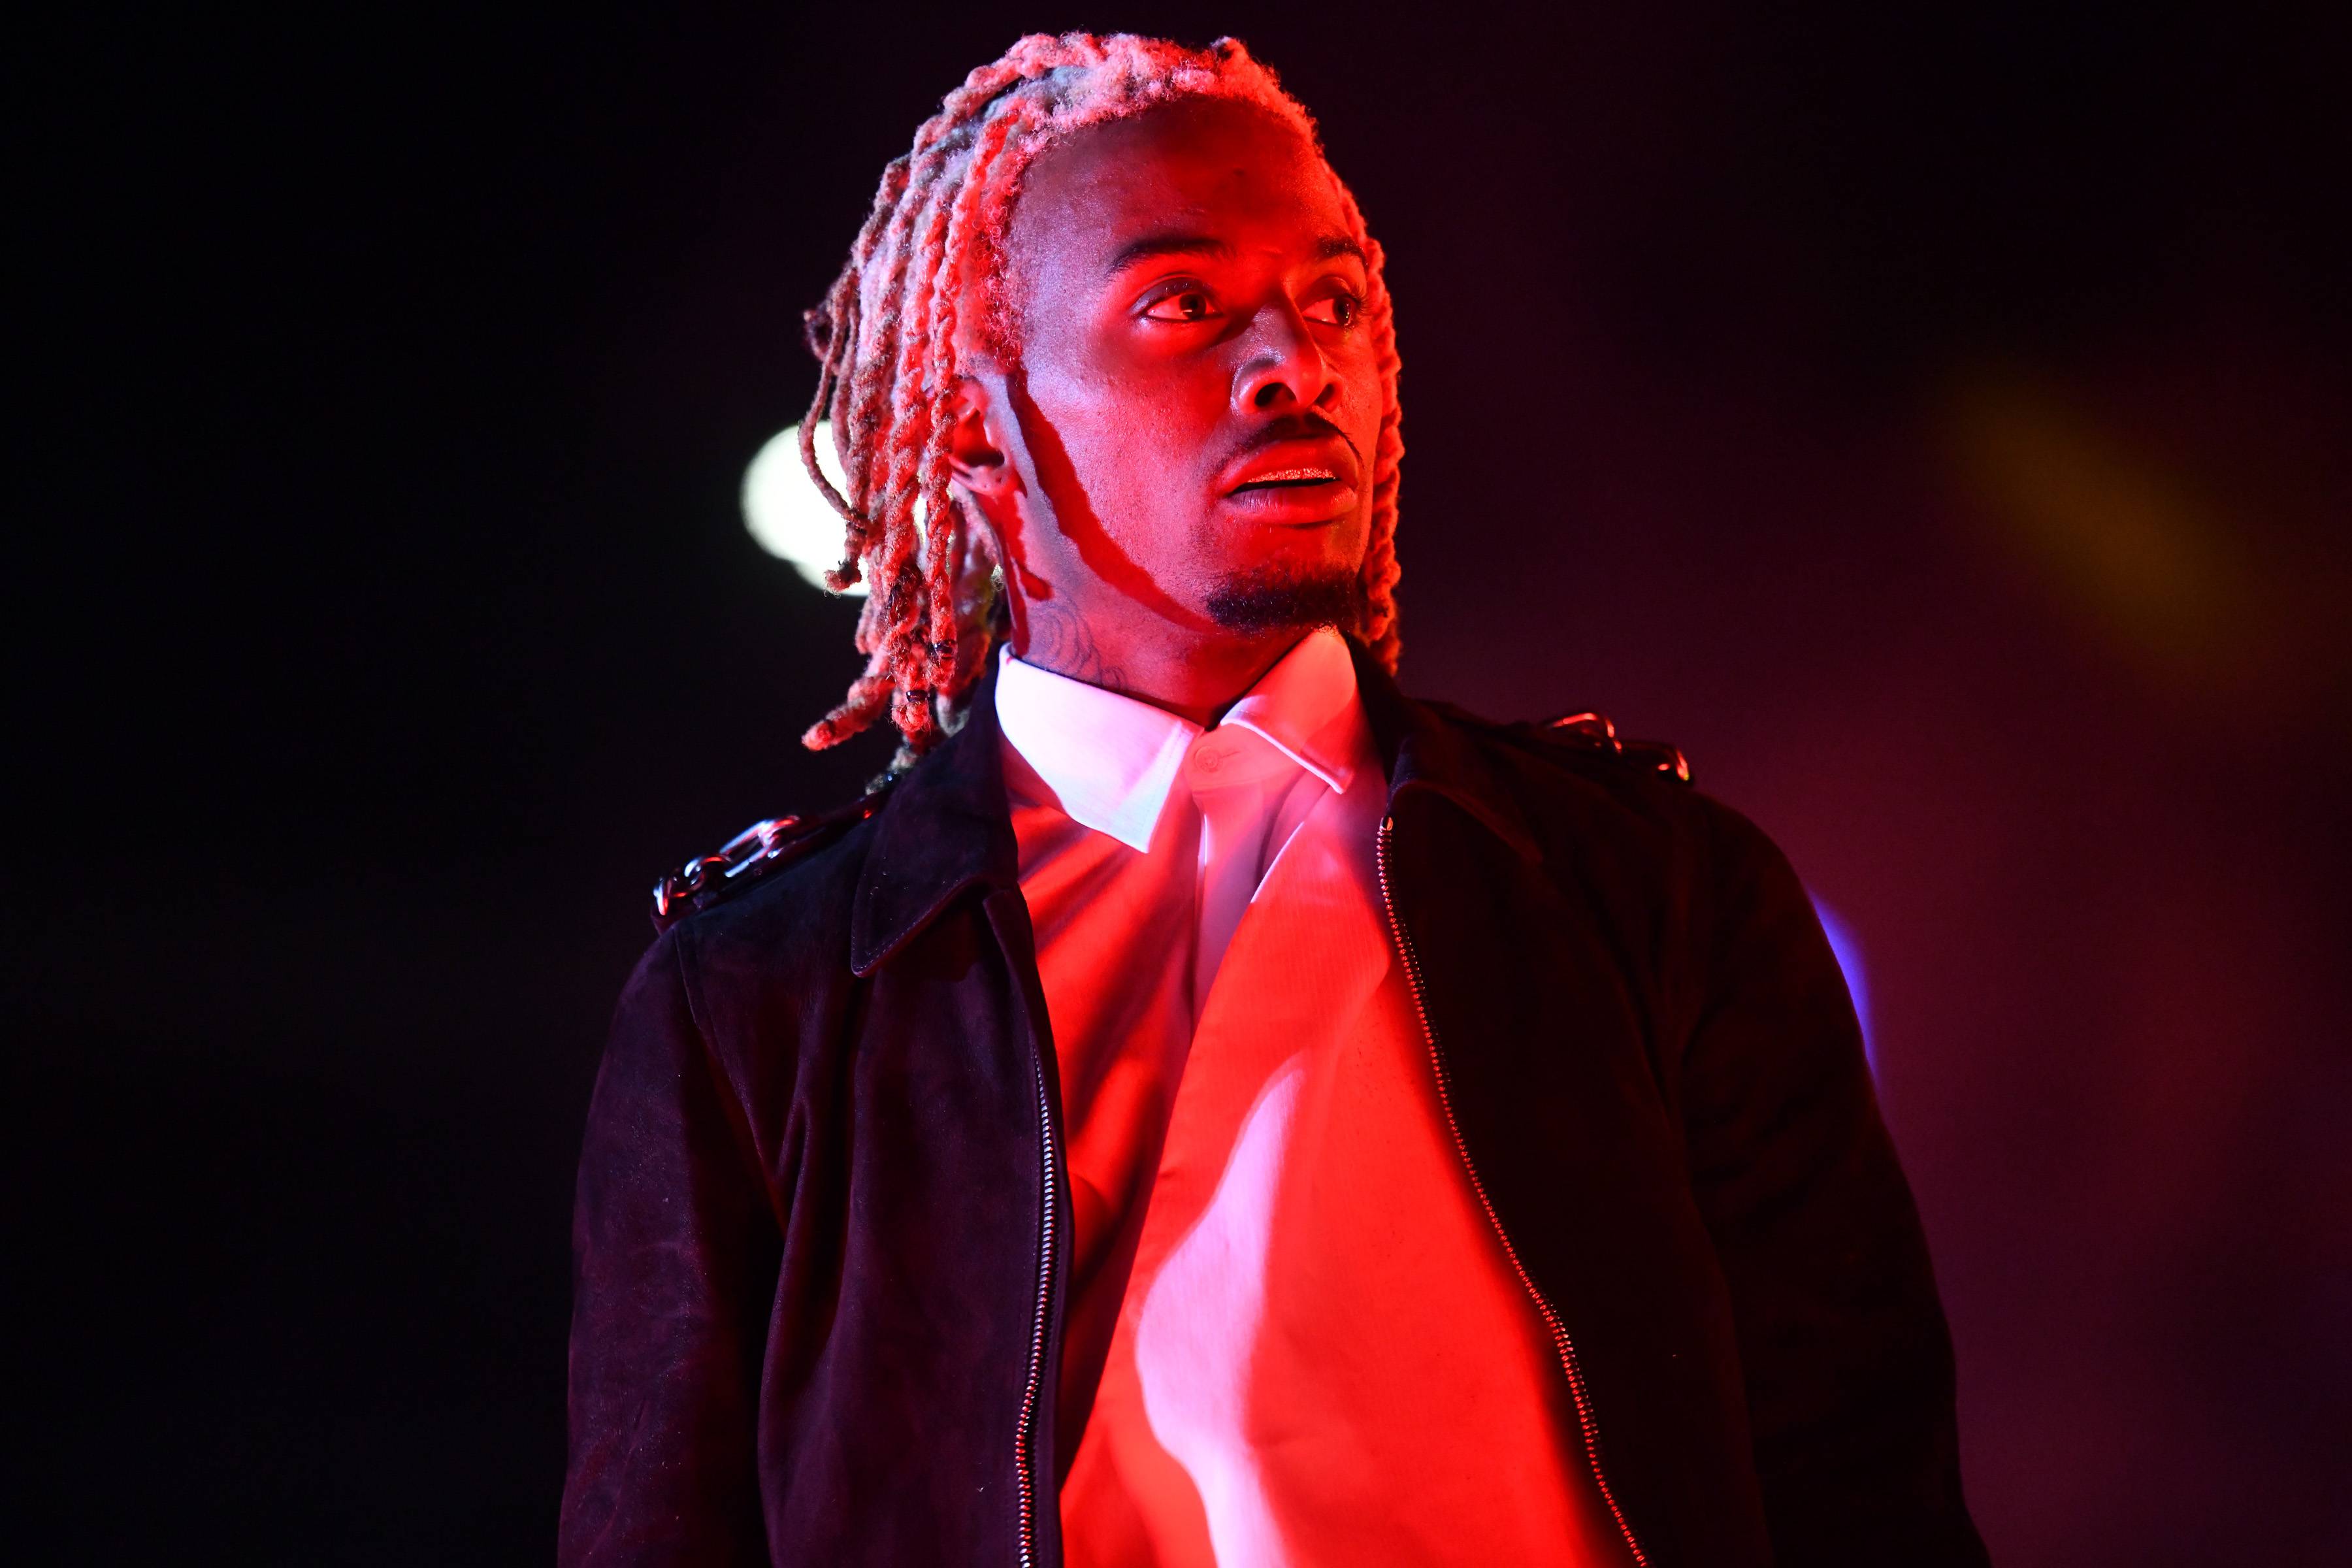 LOS ANGELES, CALIFORNIA - DECEMBER 14: Rapper Playboi Carti performs onstage during day 1 of the Rolling Loud Festival at Banc of California Stadium on December 14, 2019 in Los Angeles, California. (Photo by Scott Dudelson/Getty Images)